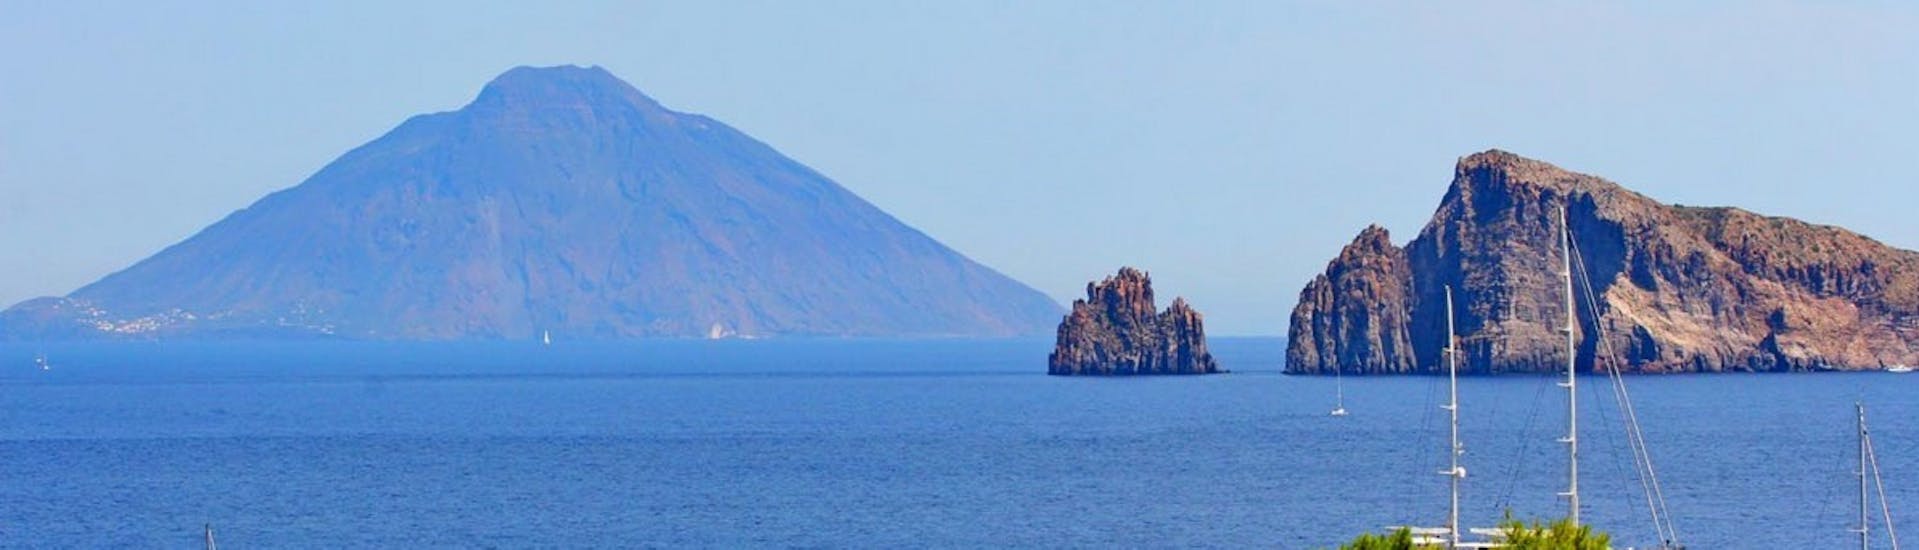 Picture of the Aeolian Islands taken during the Boat Trip to Stromboli, Lipari and Vulcano from Tropea.